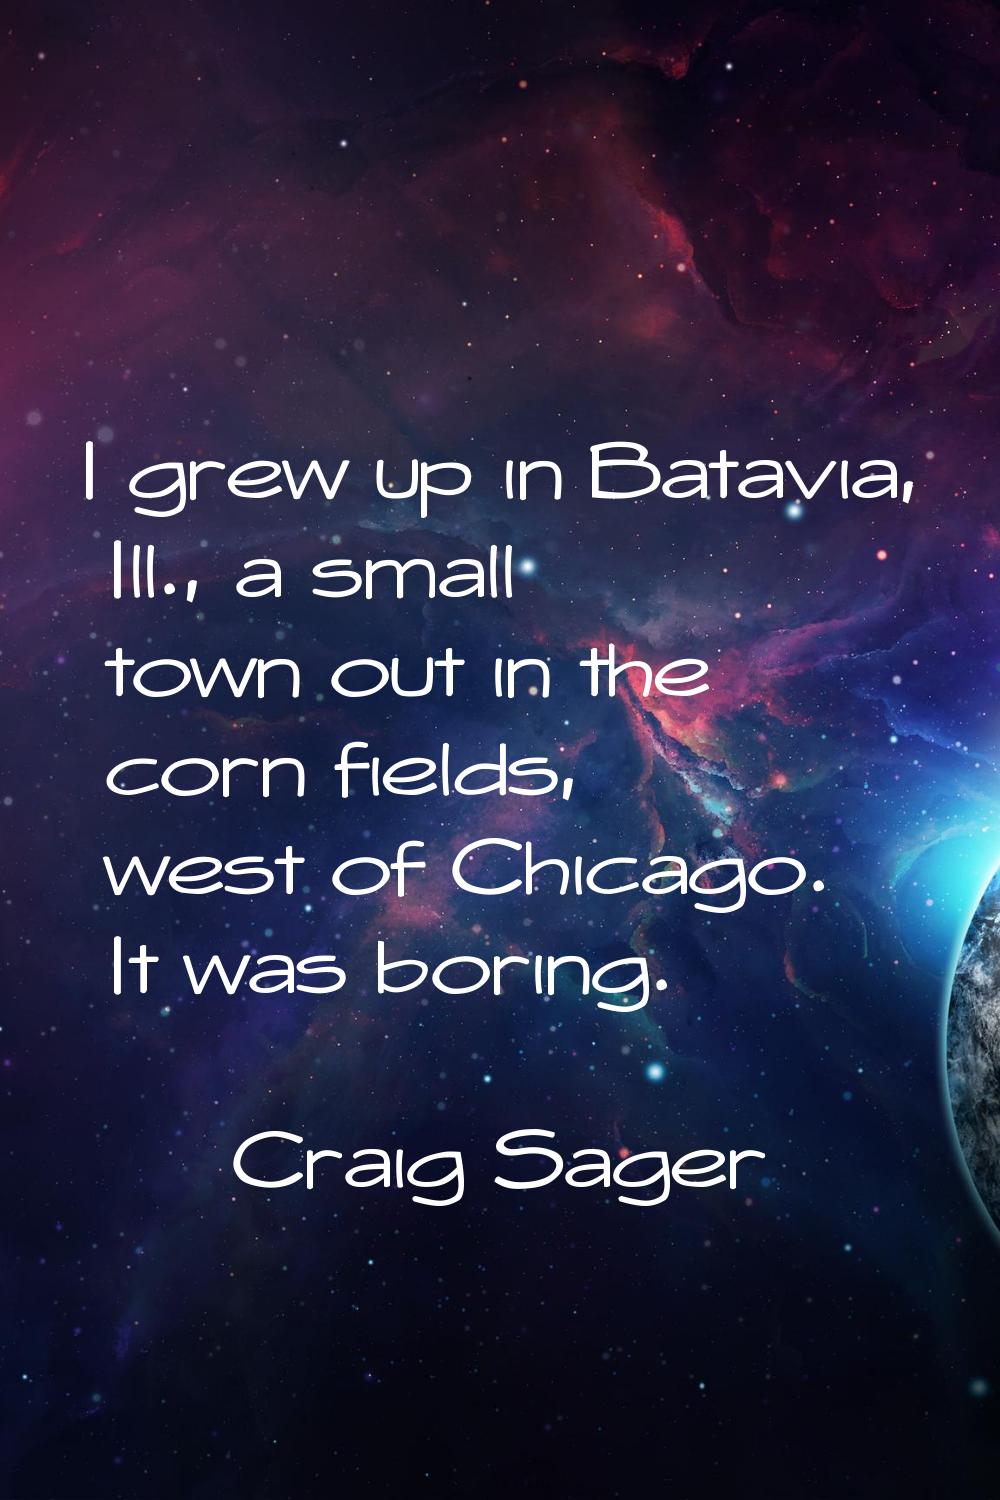 I grew up in Batavia, Ill., a small town out in the corn fields, west of Chicago. It was boring.